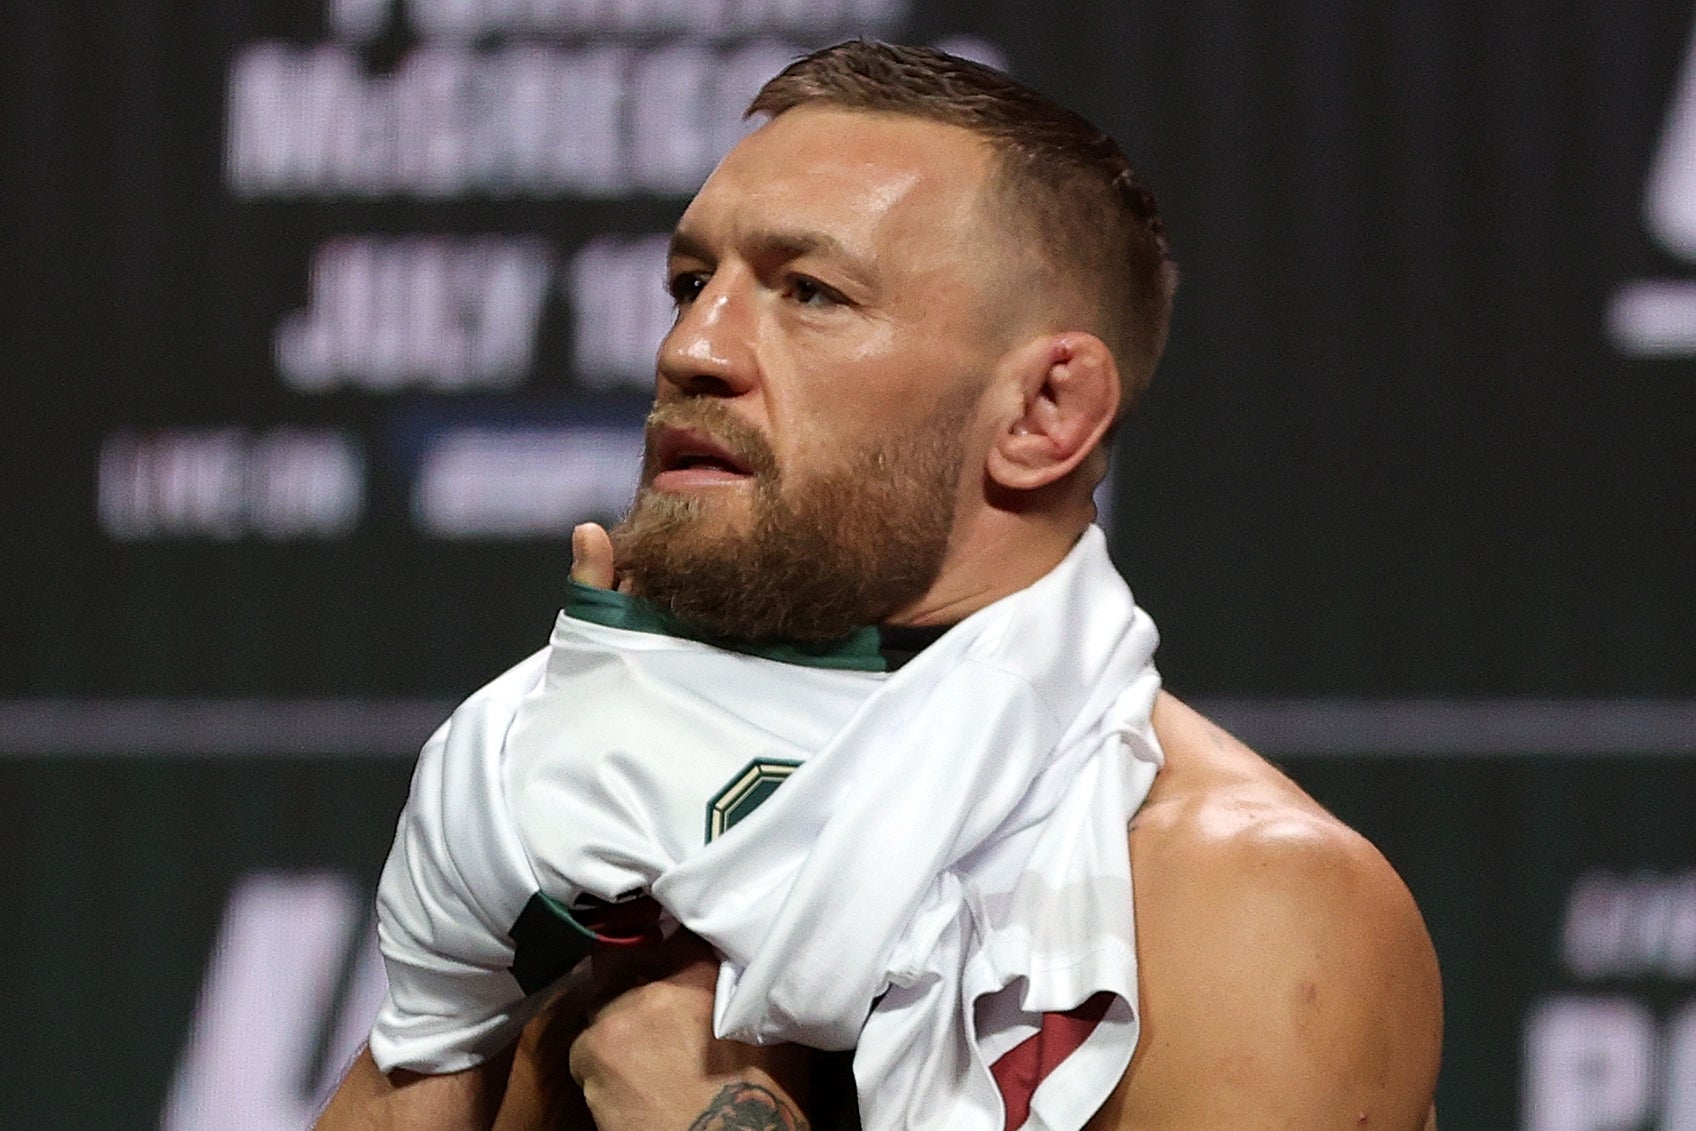 Conor McGregor before his last fight, a loss to Dustin Poirier in July 2021